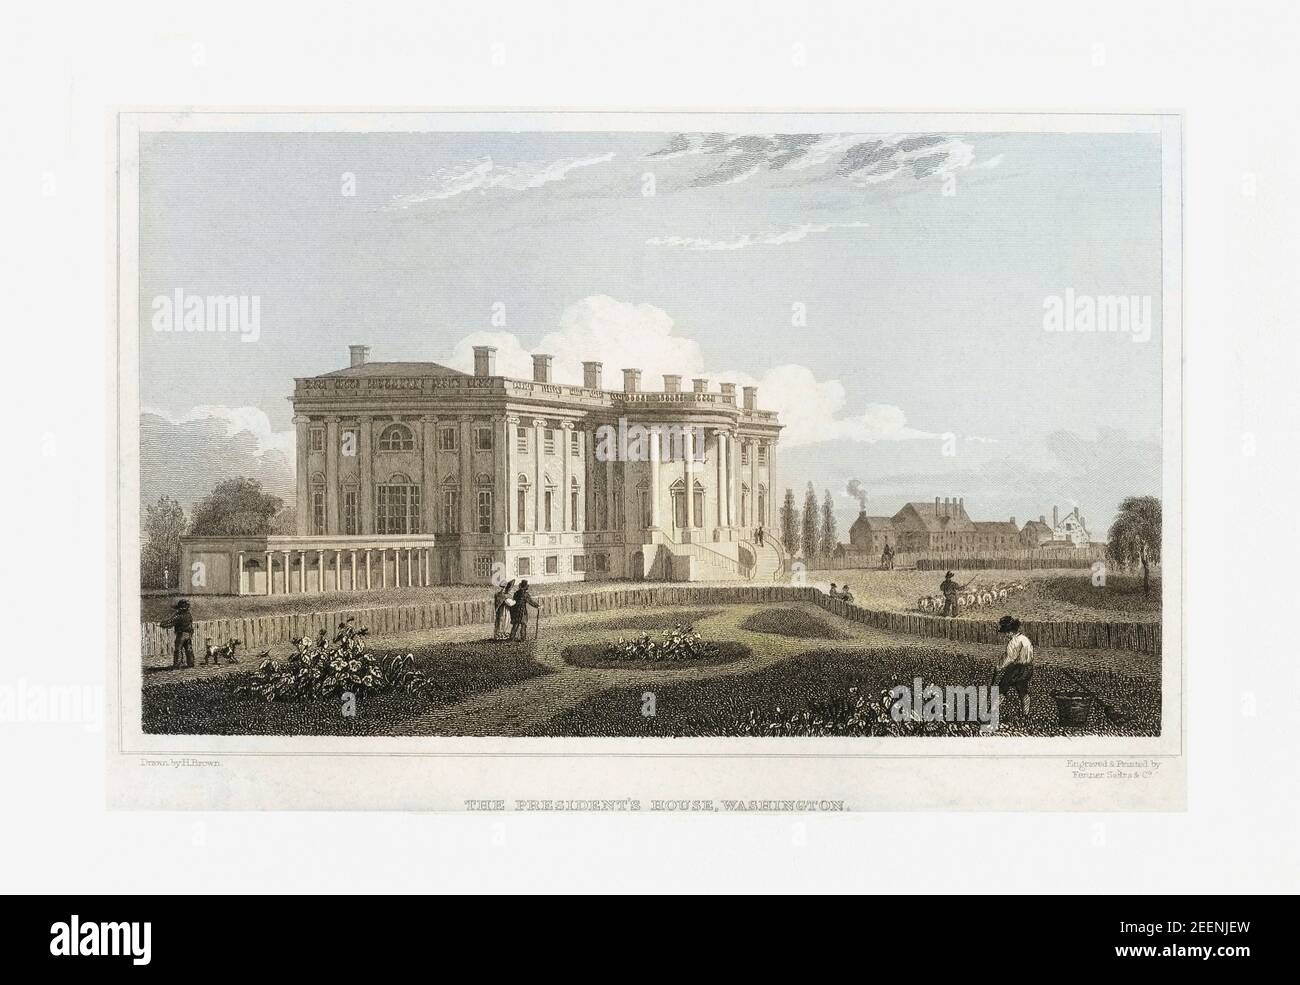 The President's House, Washington.  A version of this picture of the White House was used as the White House Christmas Card in 1974 during President Gerald Ford's tenure.  After a mid-19th century engraving by Fenner, Sears & Co from a work by H. Brown. Stock Photo